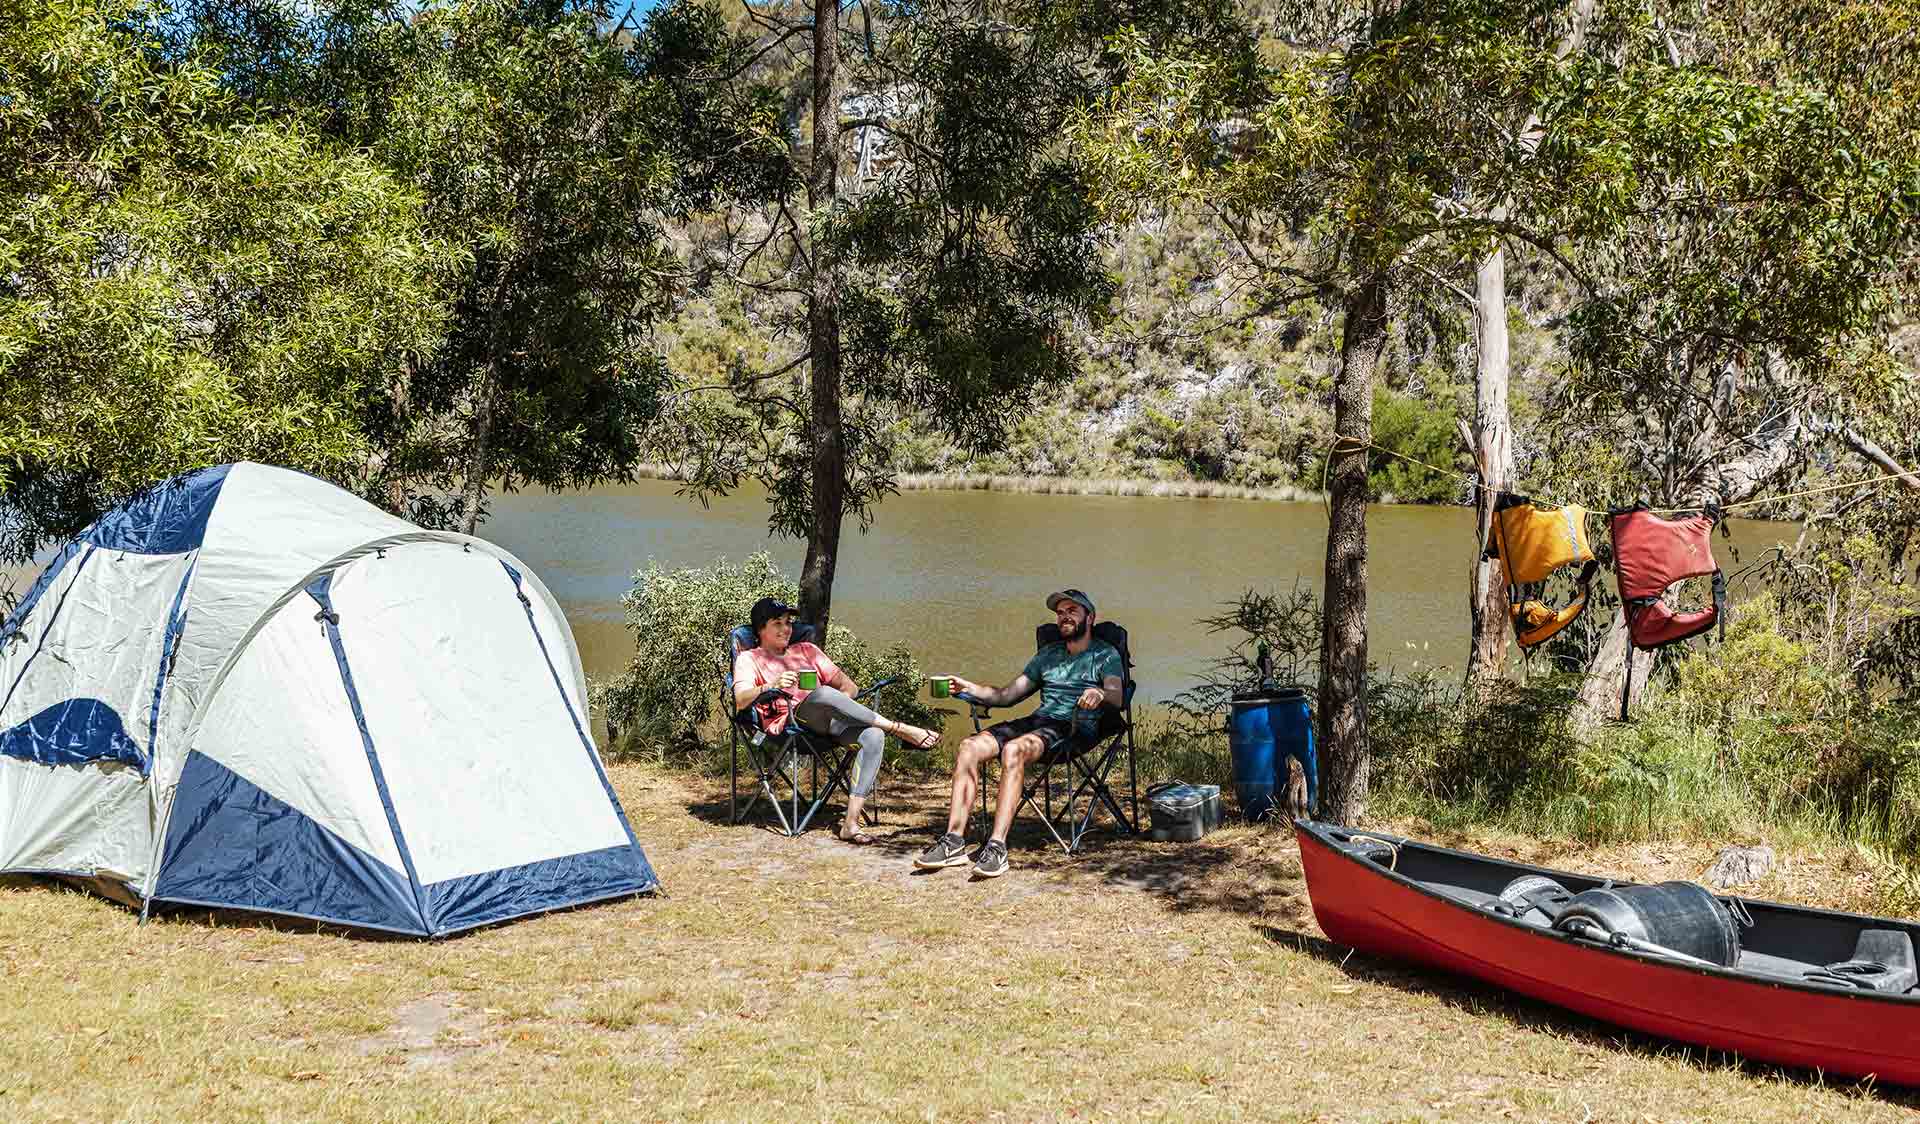 Two campers relax at their campsite after a long paddle on the Glenelg River.